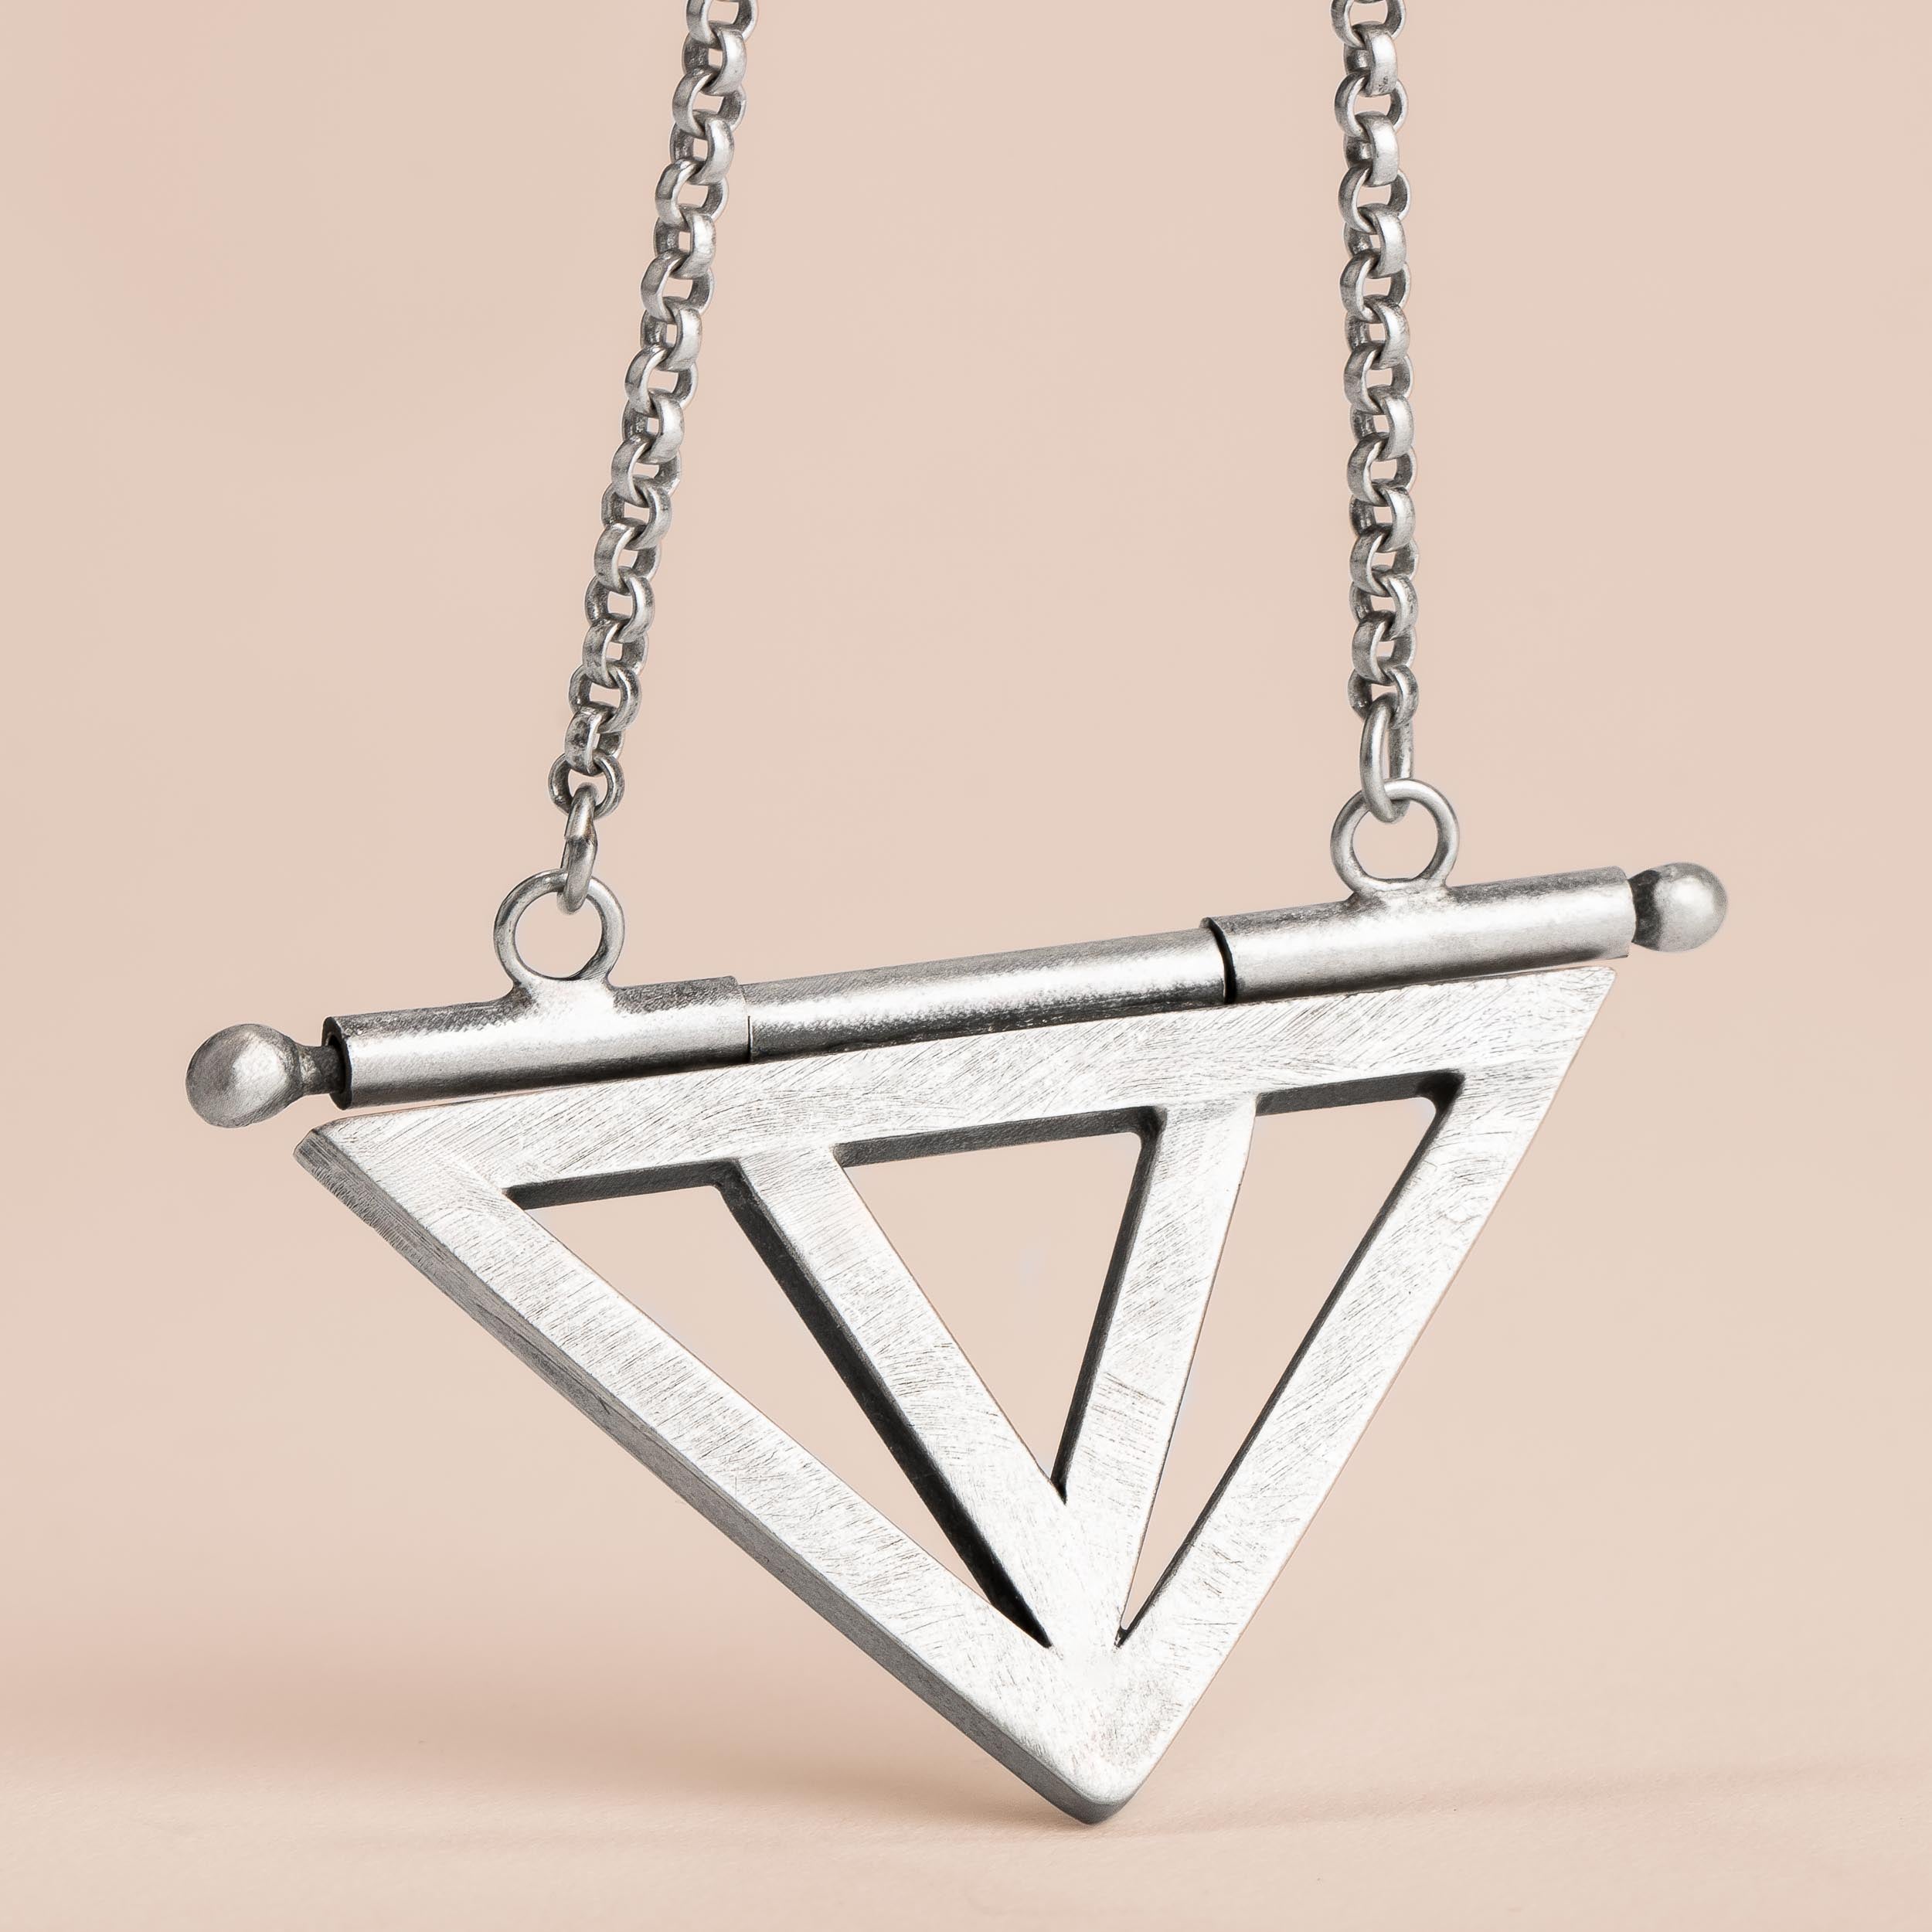 The Vault Necklace